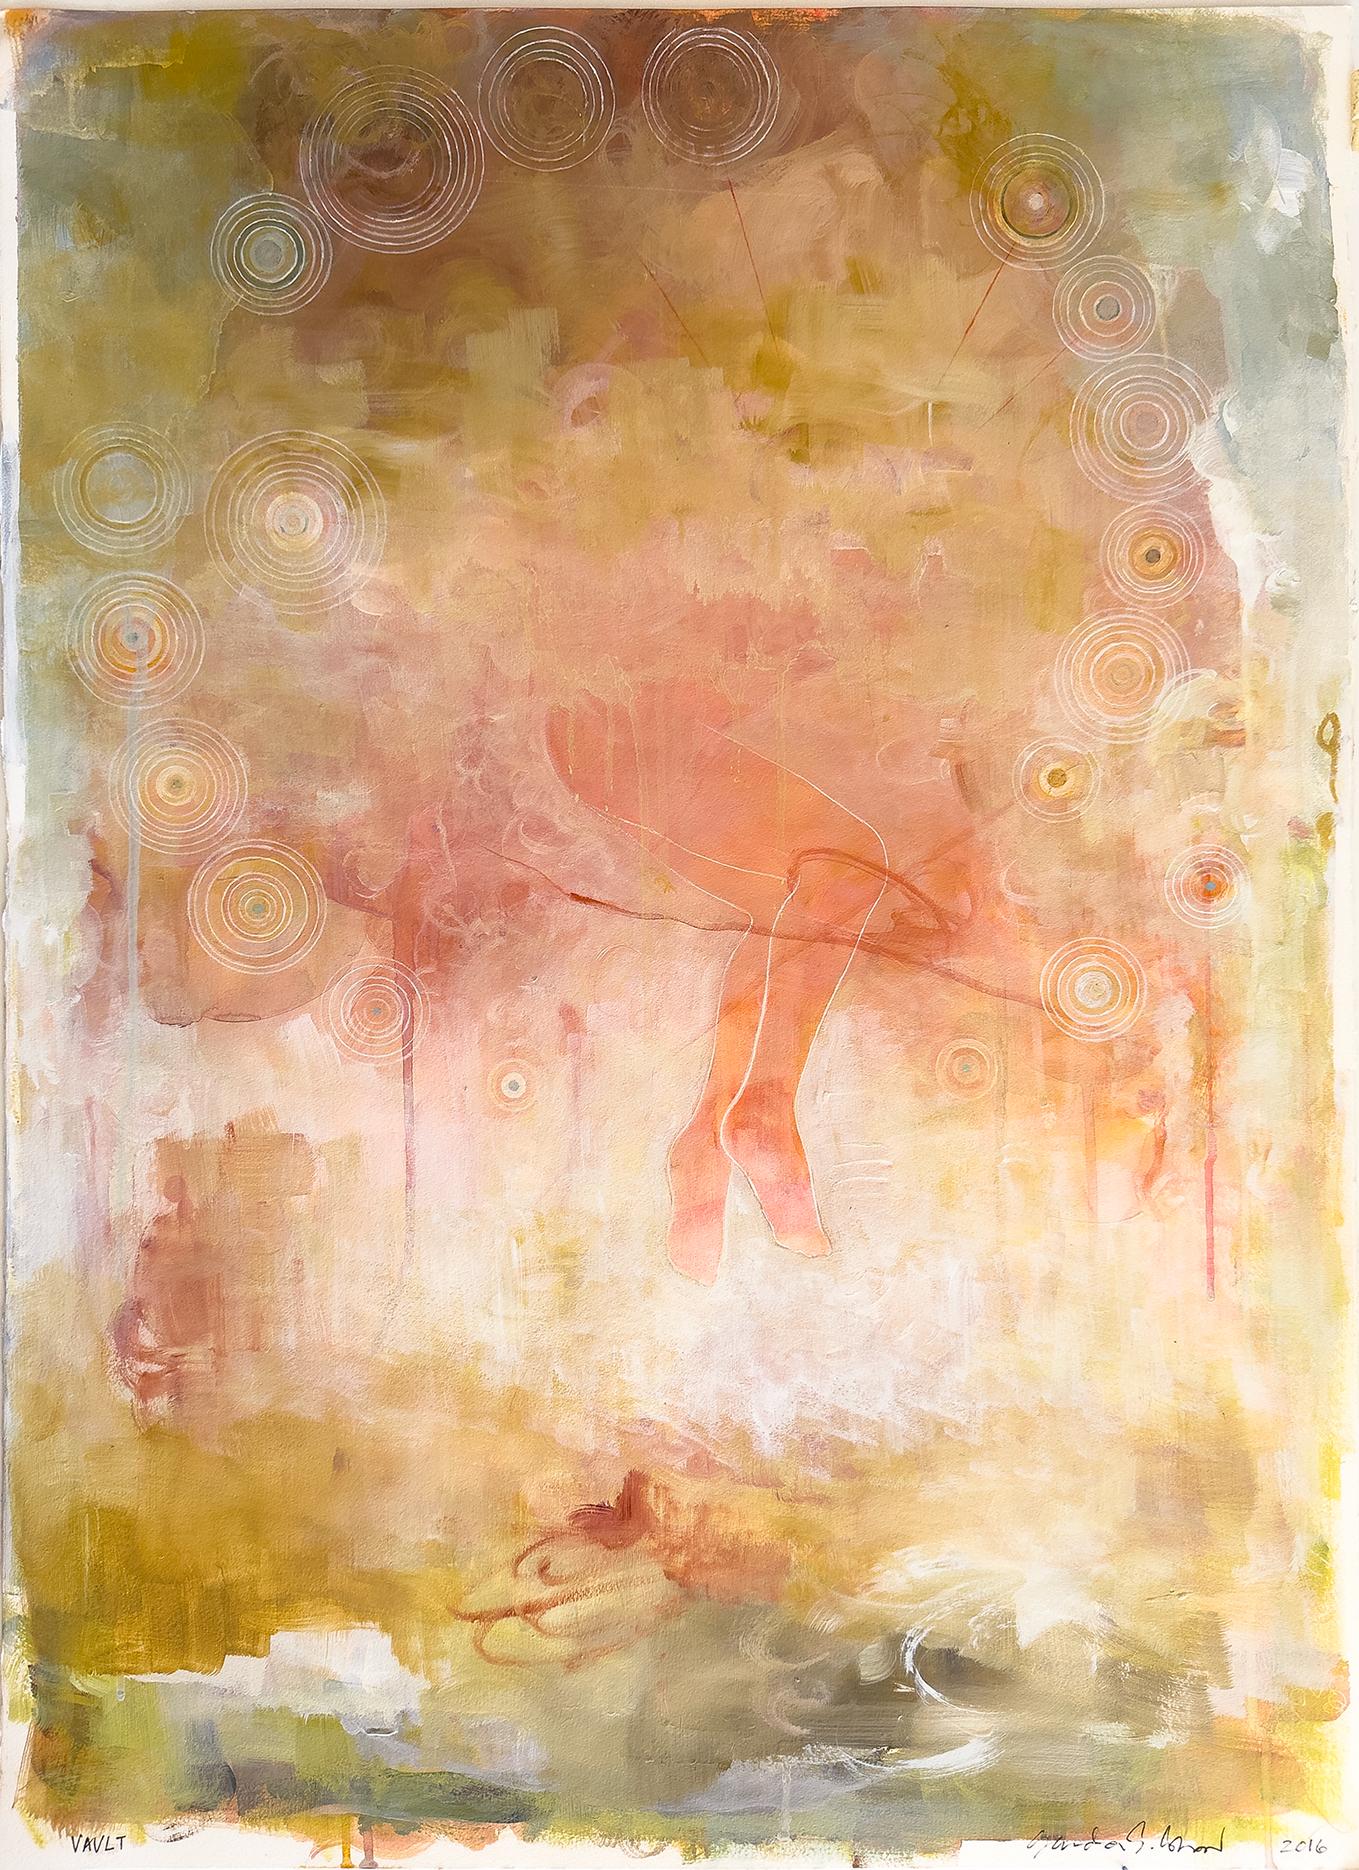 Sandra Cohen Abstract Painting - "Vault", abstract, figure, landscape, yellow, orange, pink, acrylic painting